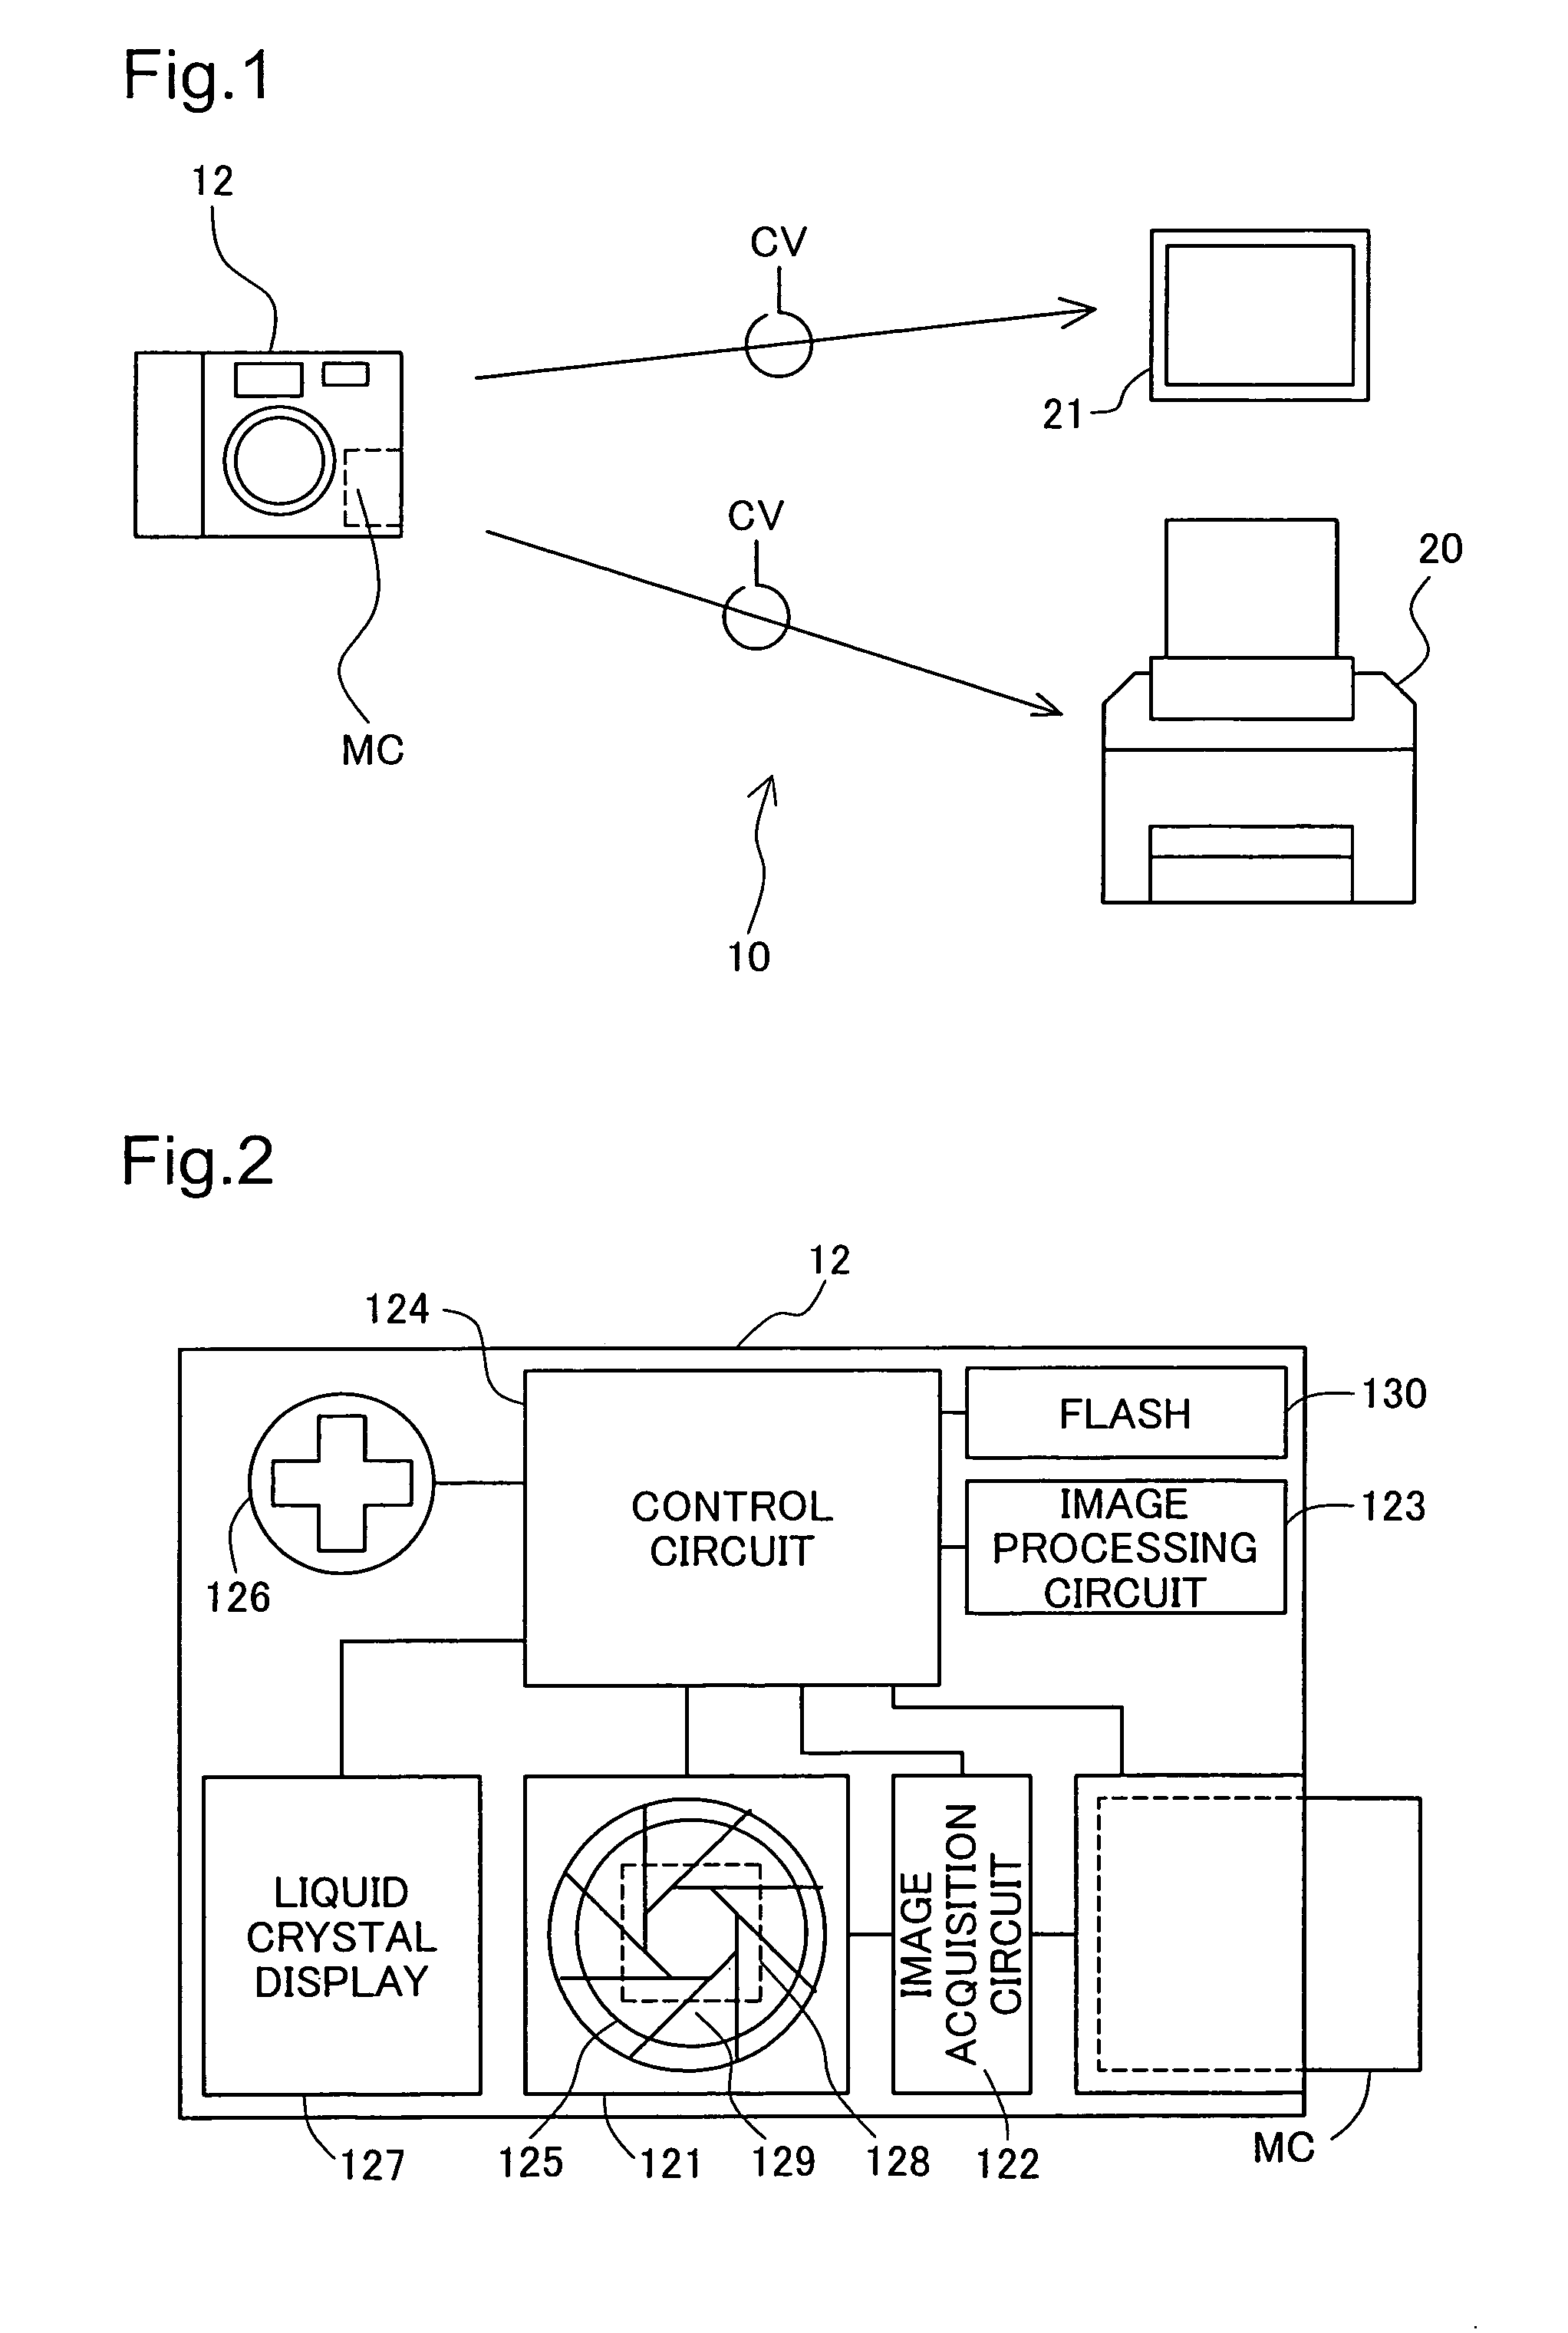 Automatic adjustment of image quality according to type of light source